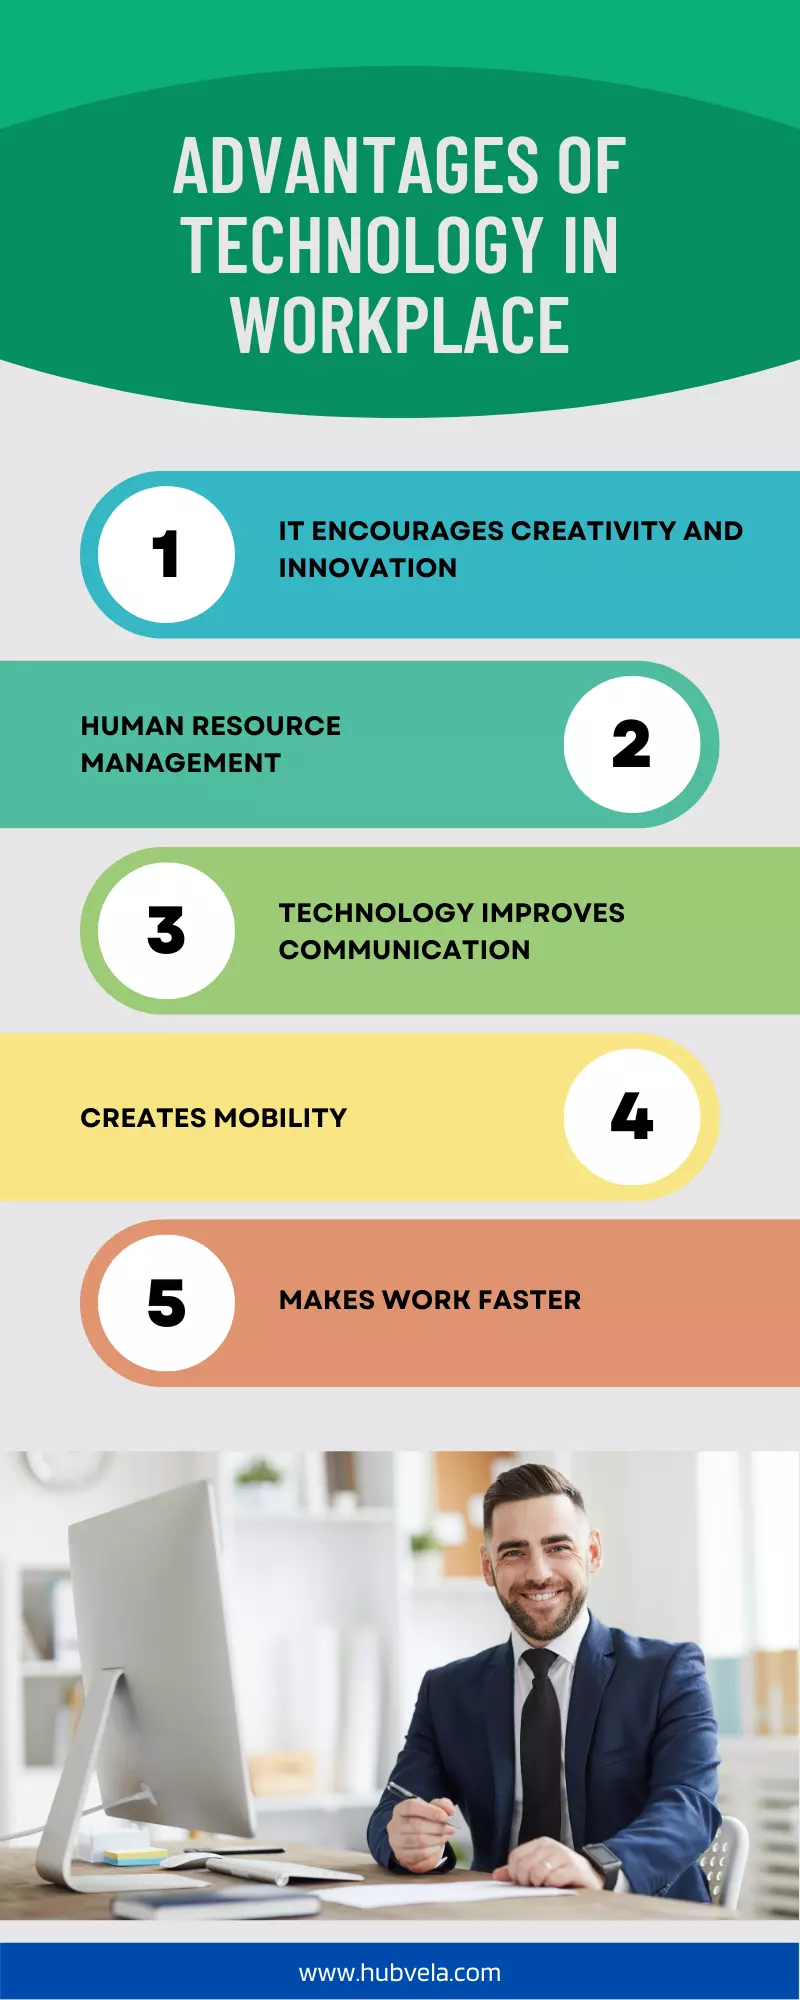 Advantages of Technology in Workplace infographic